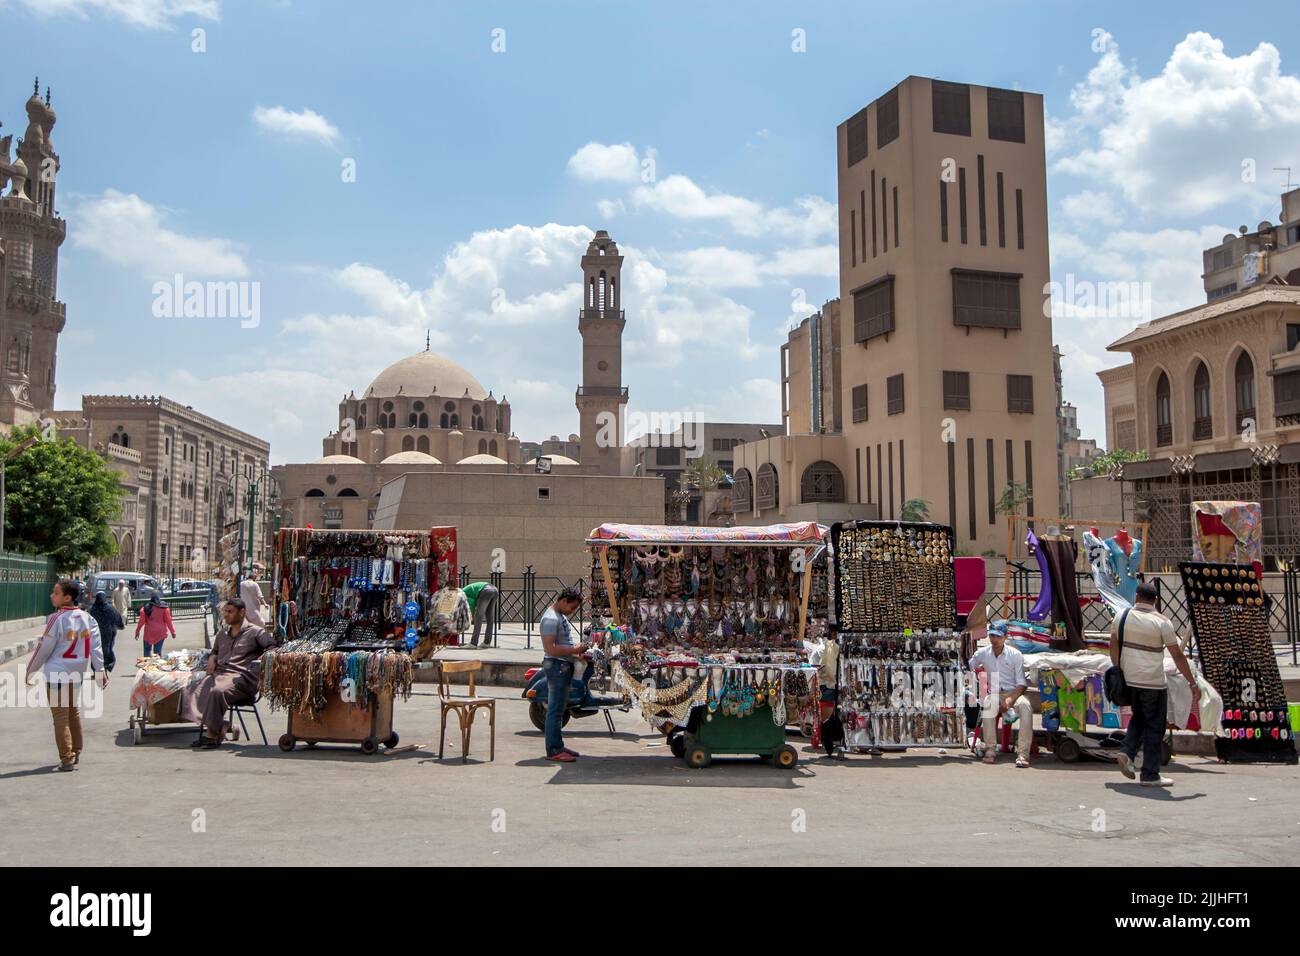 Souvenir sellers sit with their portable carts on a street adjacent to the Khan el-Khalili Bazaar at Cairo in Egypt. Stock Photo